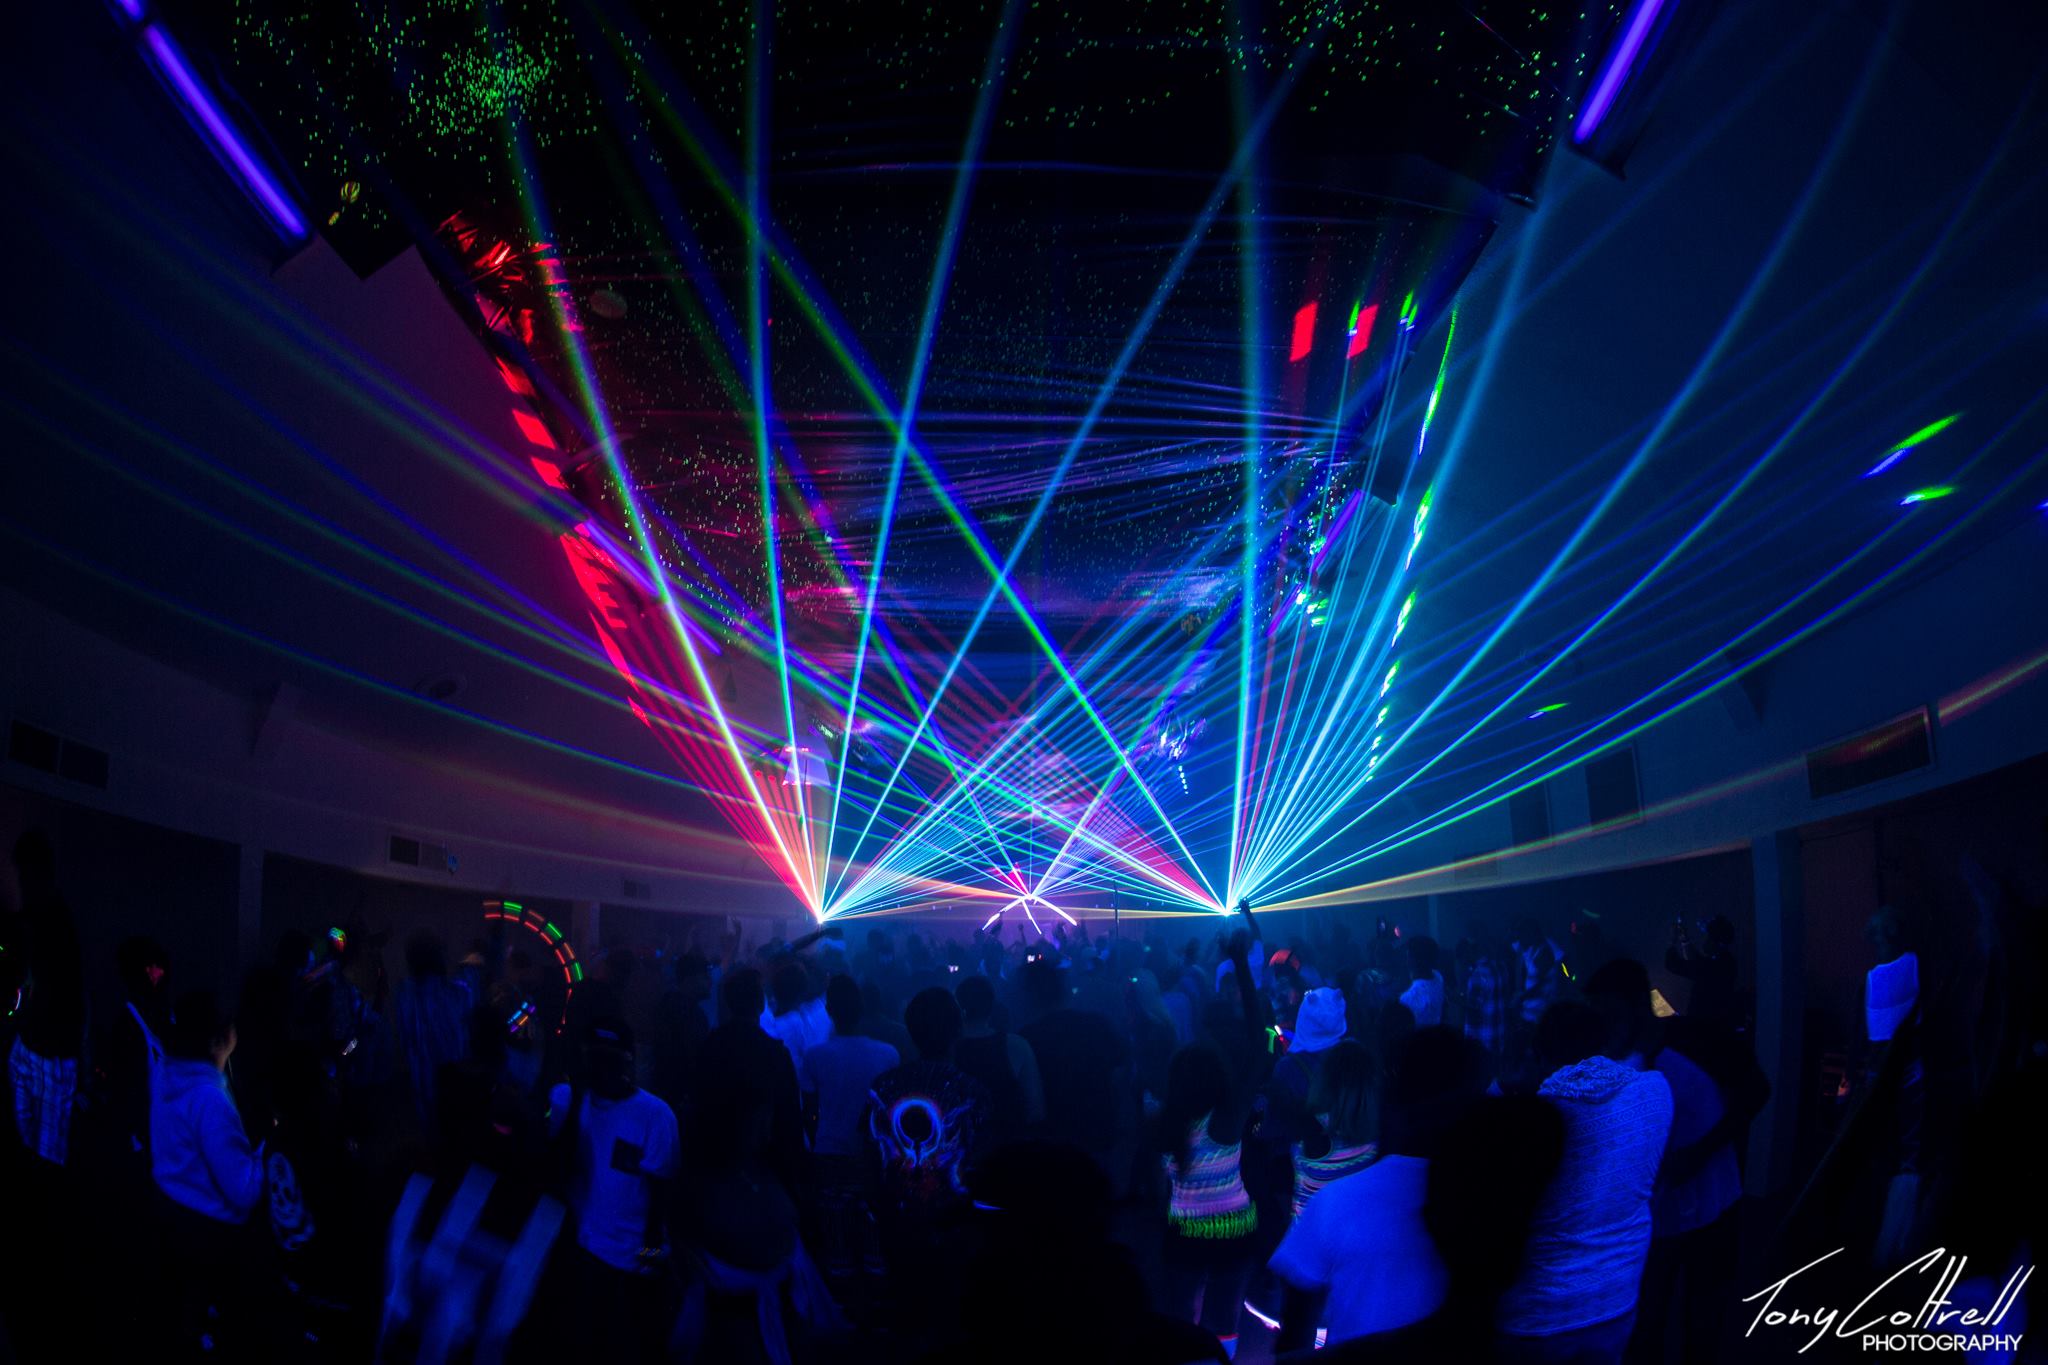 [Event Review] Underground Rave Takes Ravers to a Galaxy Far, Far